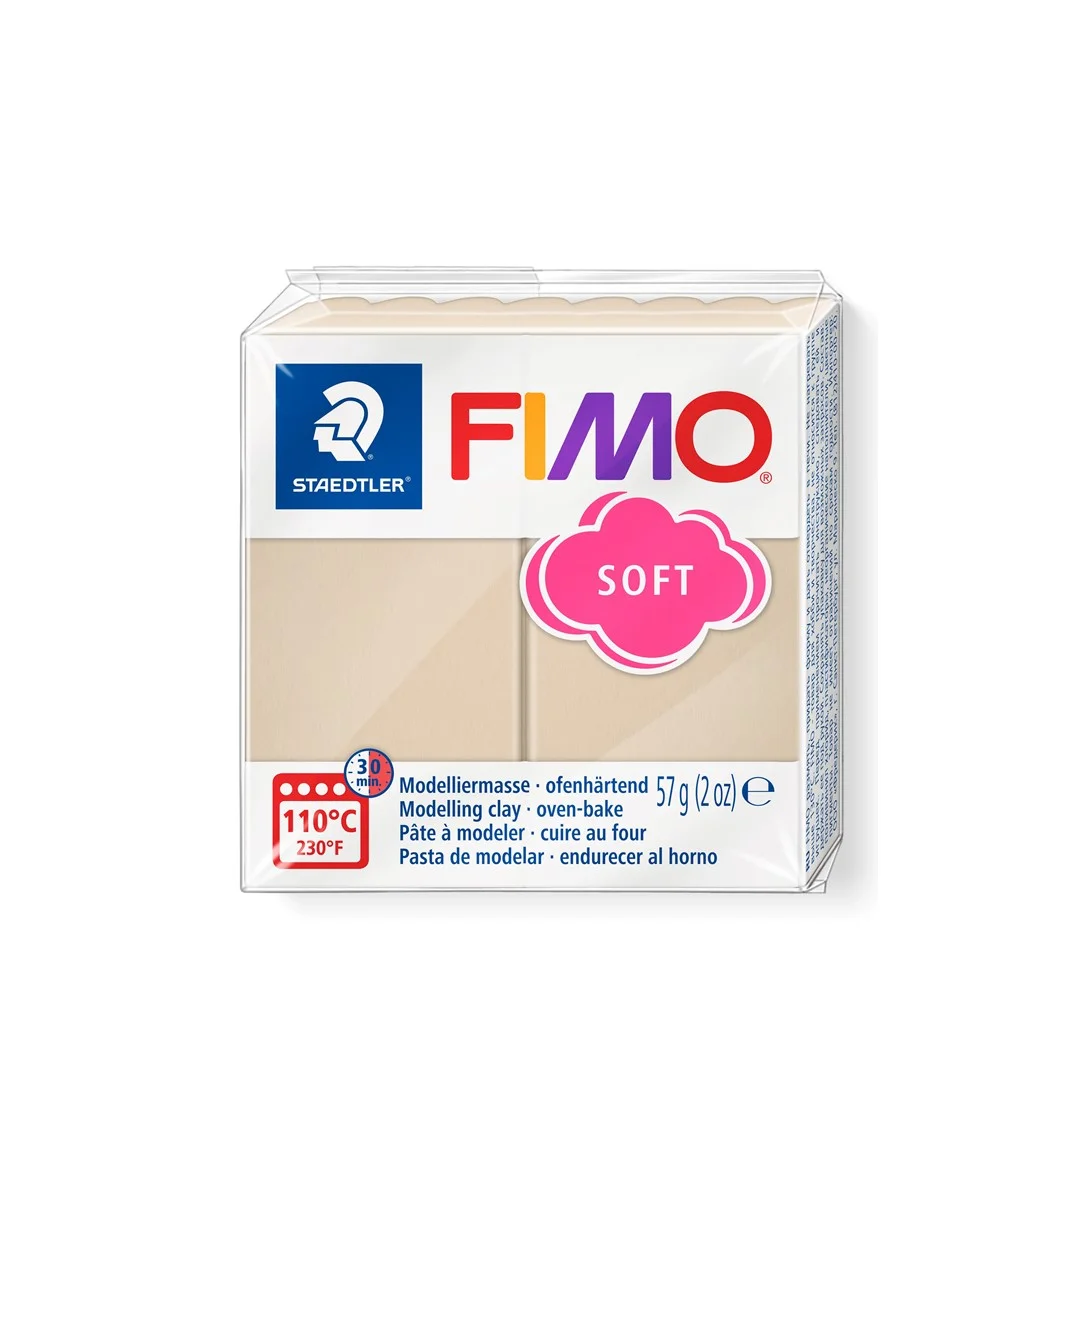 FIMO Soft Serie Polymer Clay, Sahara, Nr. 70, 57g 2oz, Oven-hardening  Polymer Modeling Clay, Basic Fimo Soft Colors by STAEDTLER 